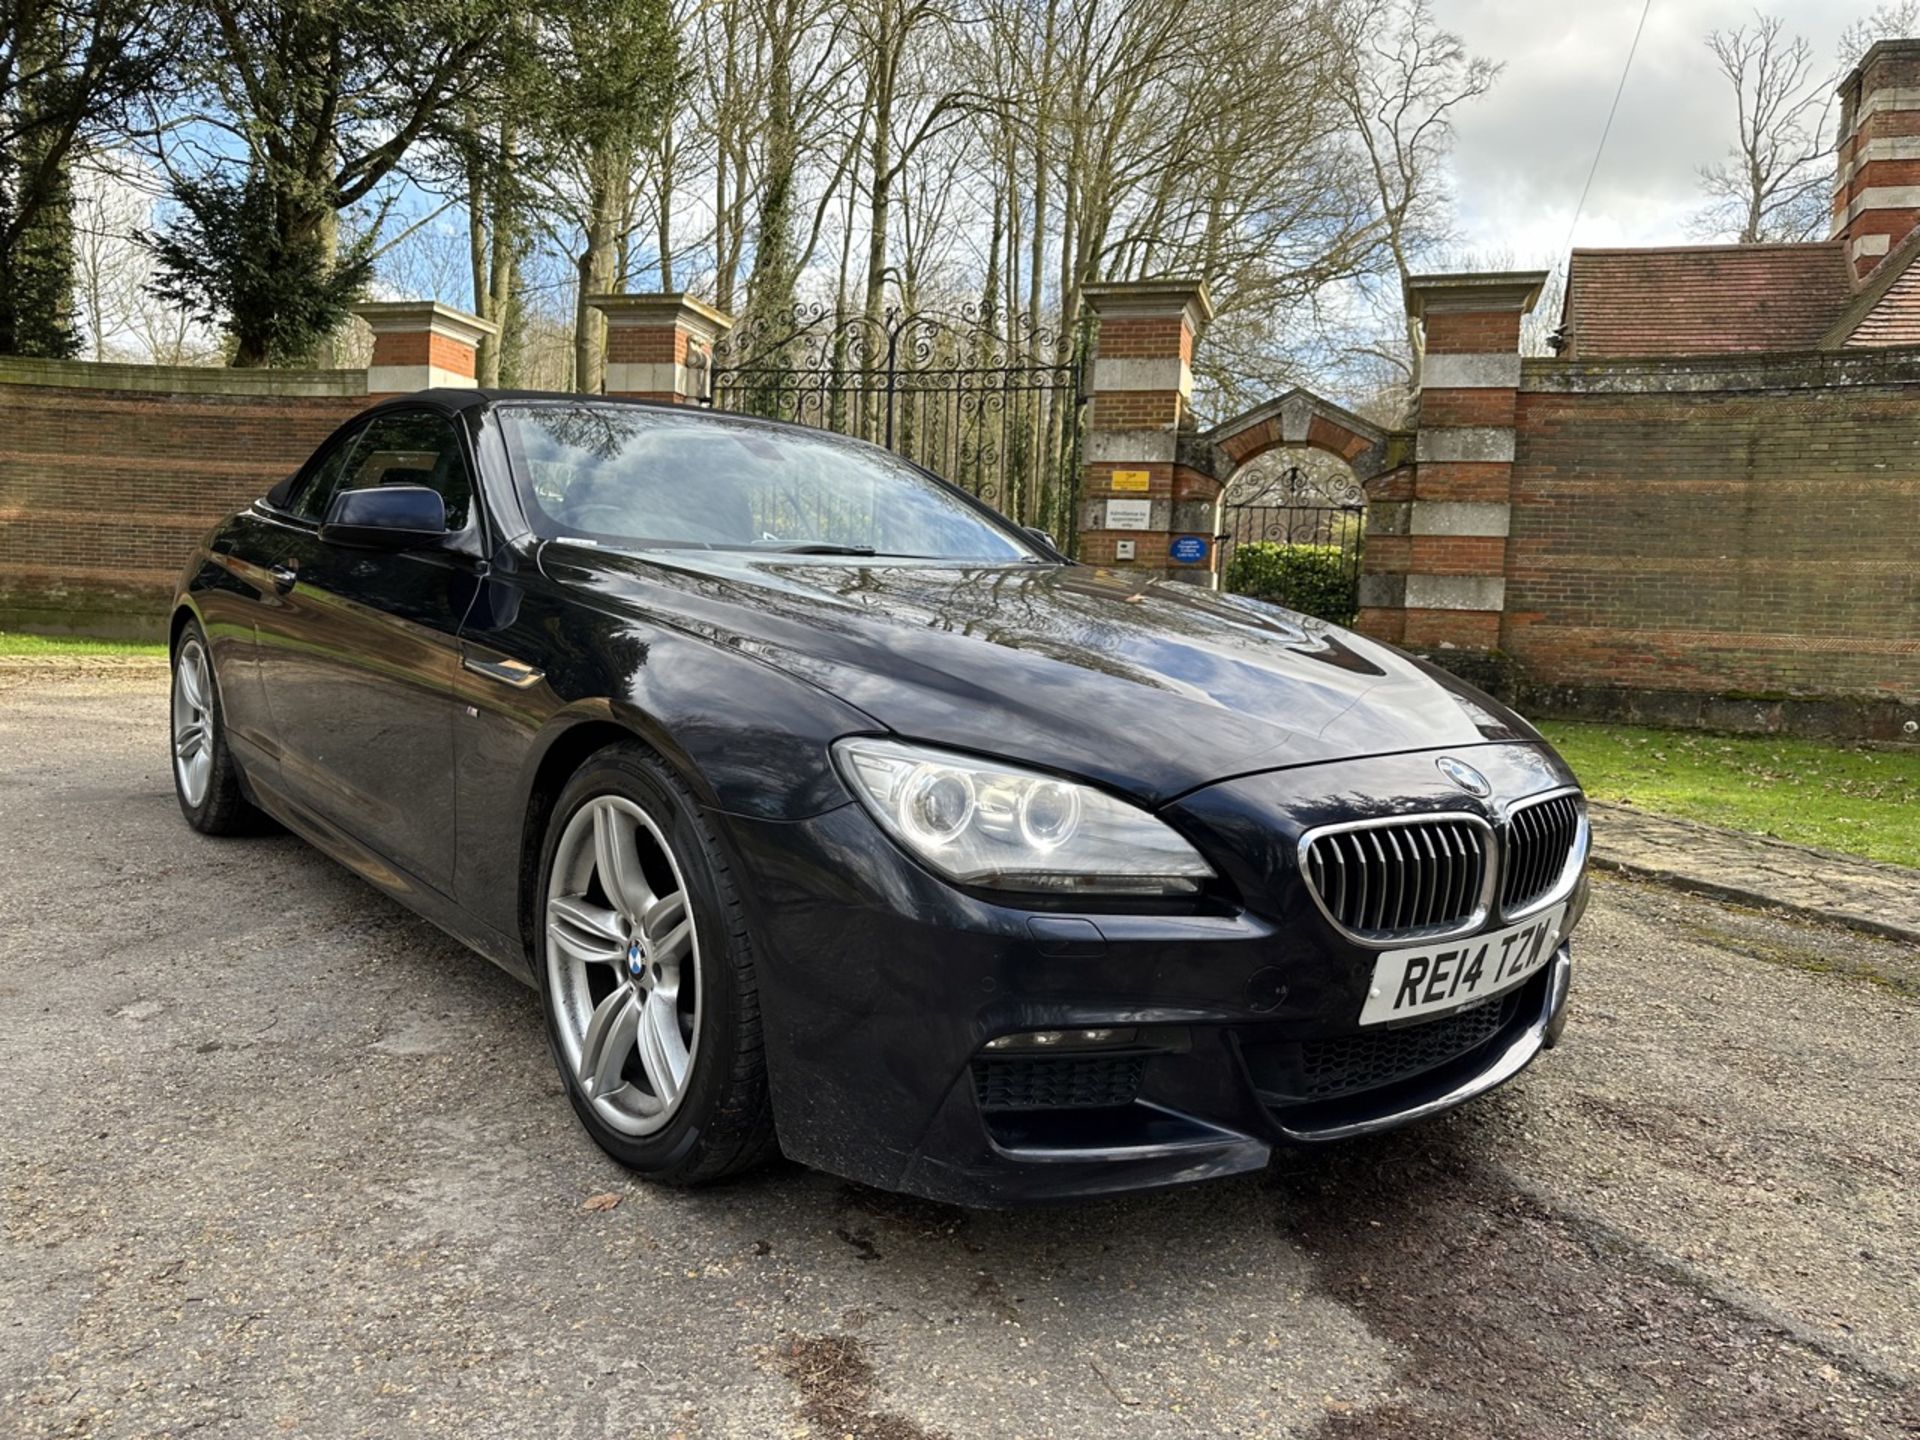 BMW 6 SERIES 640d (M SPORT) Ultimate Summer Car - AUTOMATIC - Convertible - 2014 - 3L Diesel - Image 2 of 18